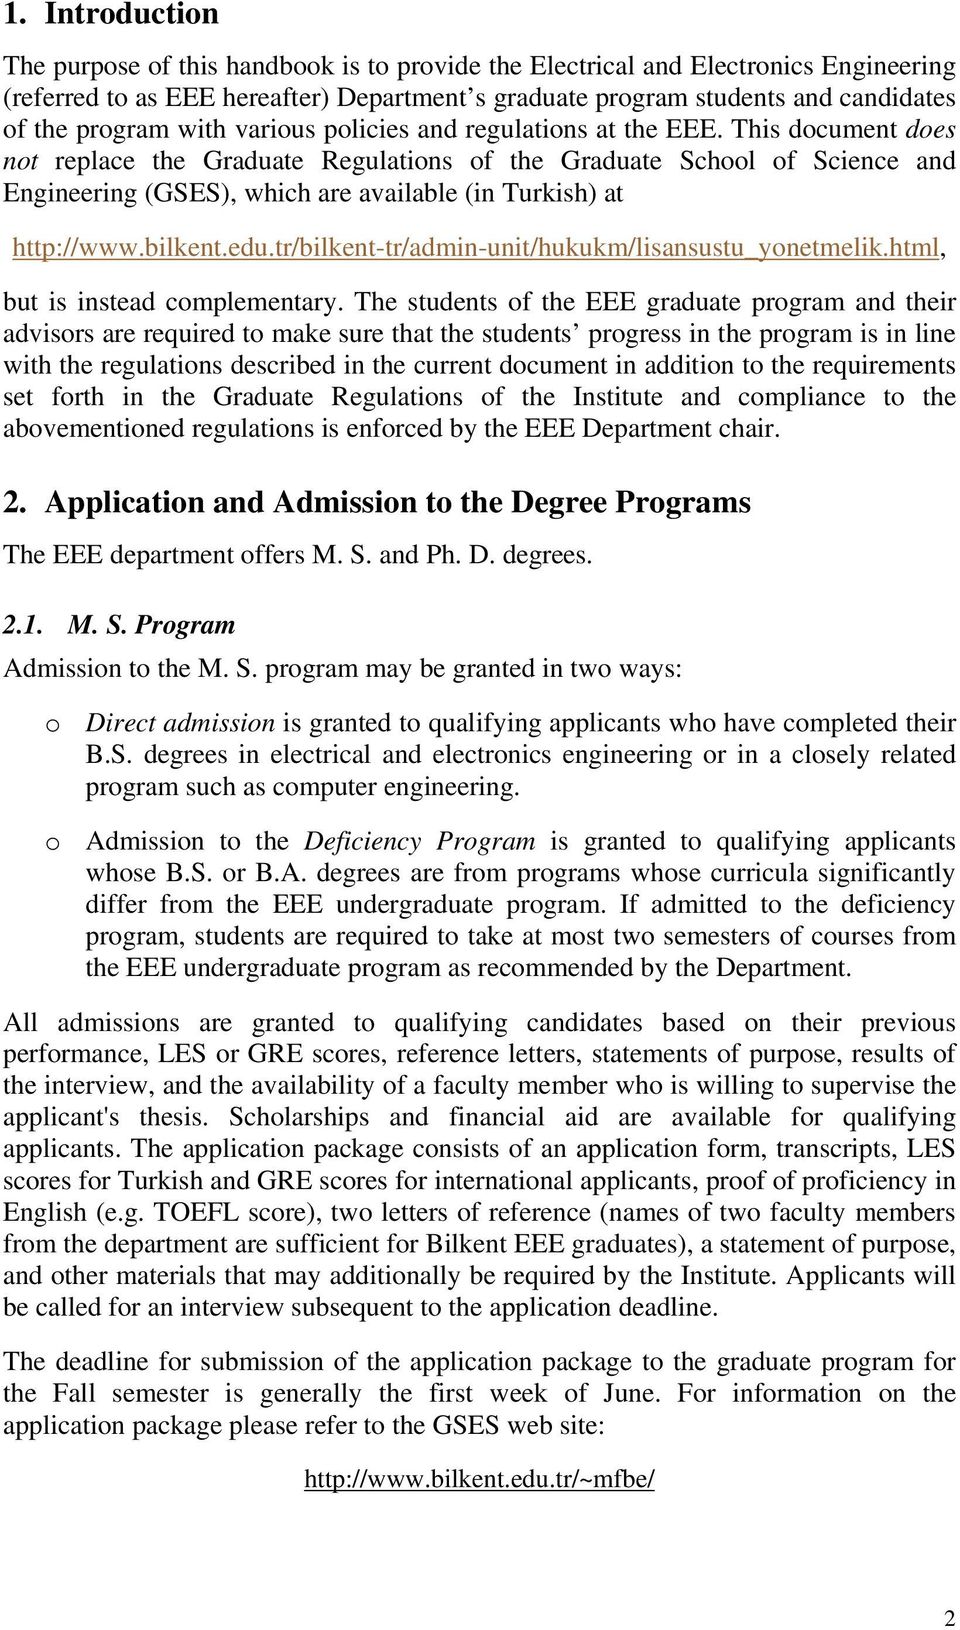 This document does not replace the Graduate Regulations of the Graduate School of Science and Engineering (GSES), which are available (in Turkish) at http://www.bilkent.edu.